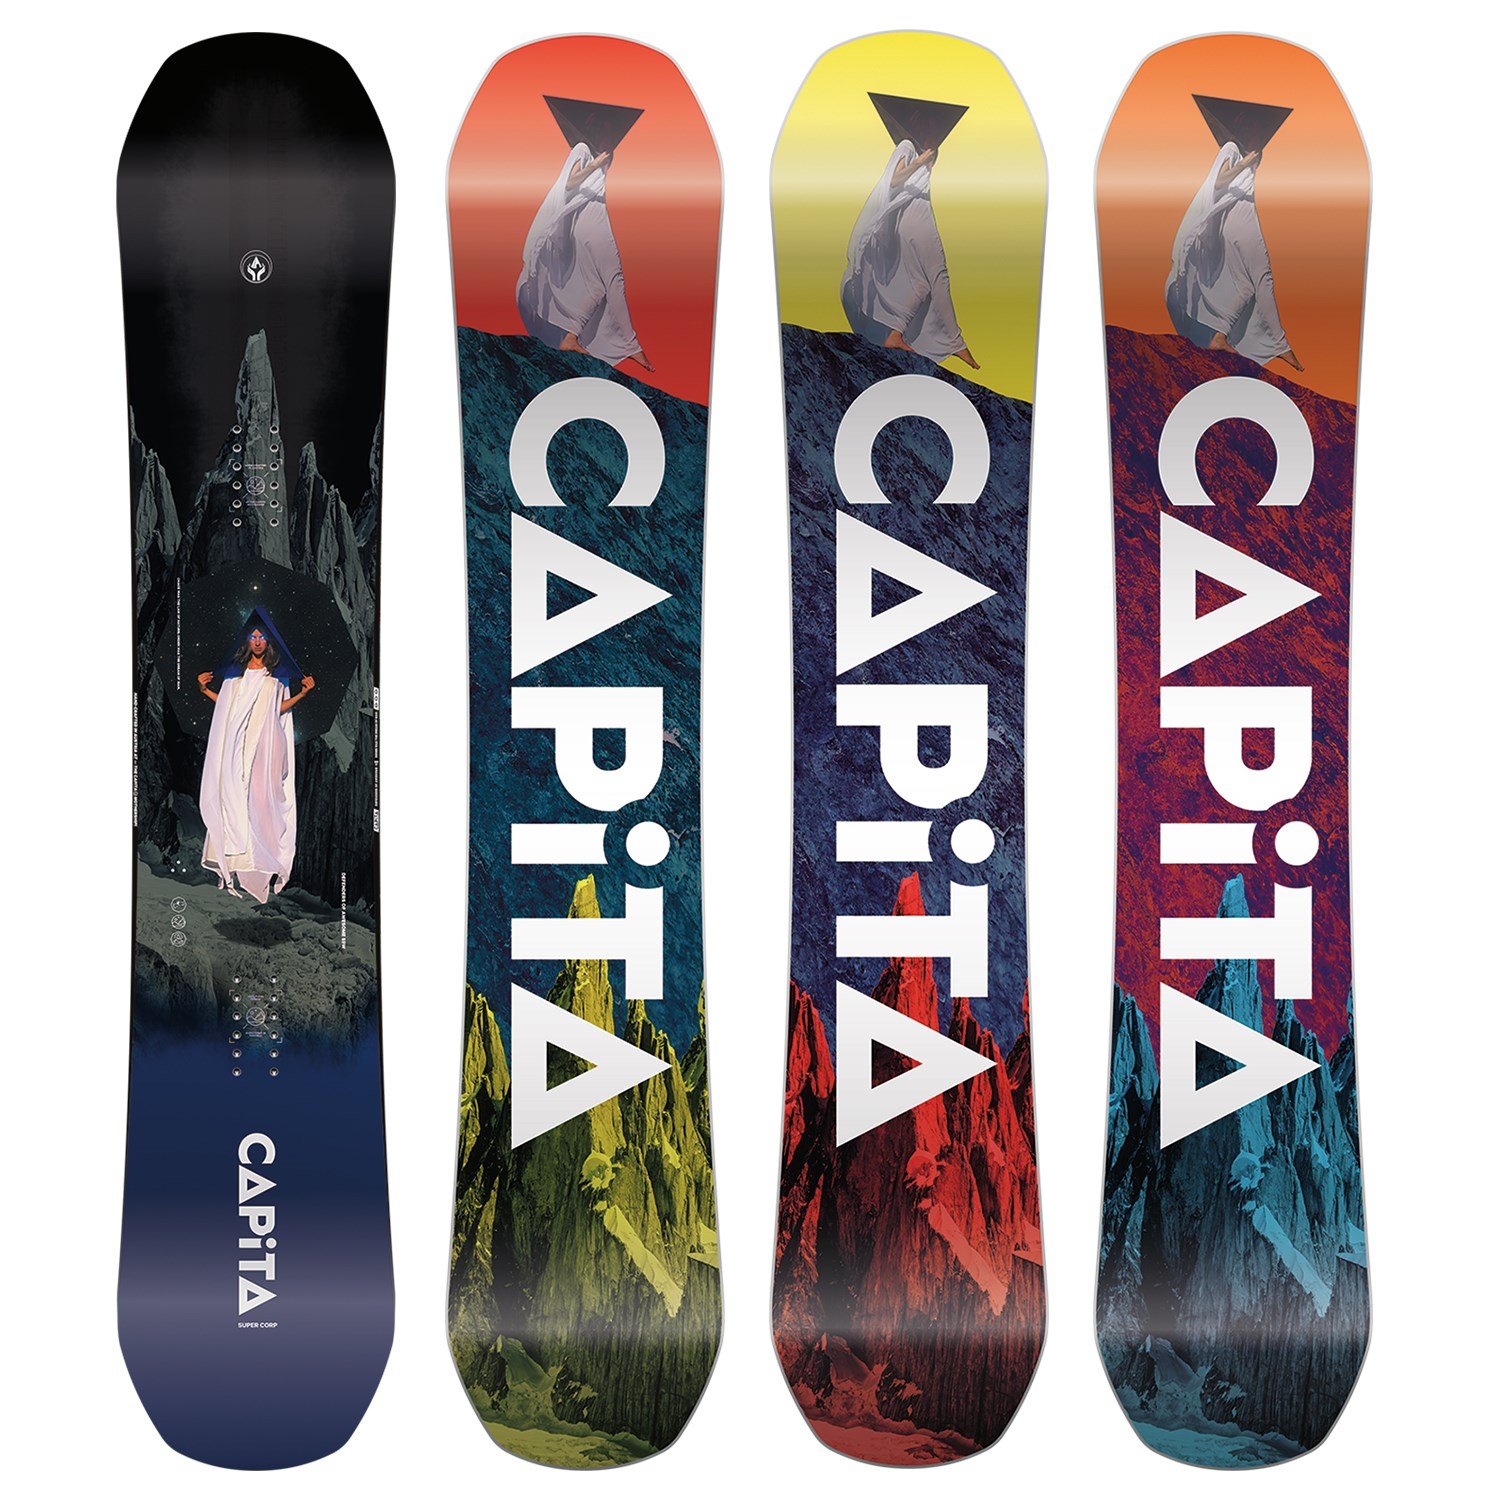 CAPiTA Defenders of Awesome Snowboard 2021 - Used